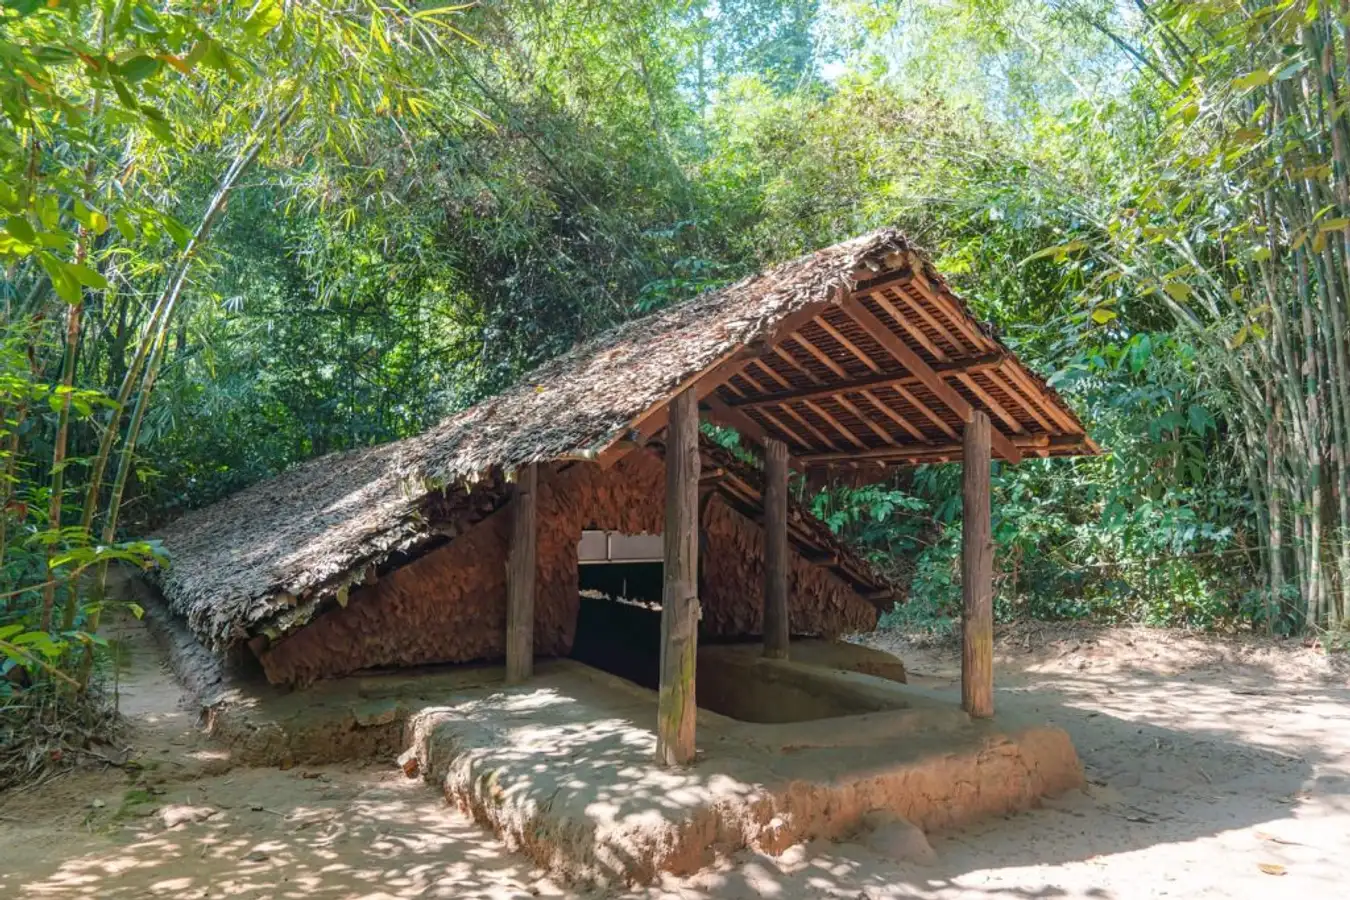 Cu Chi Tunnels tour: An exciting historical journey